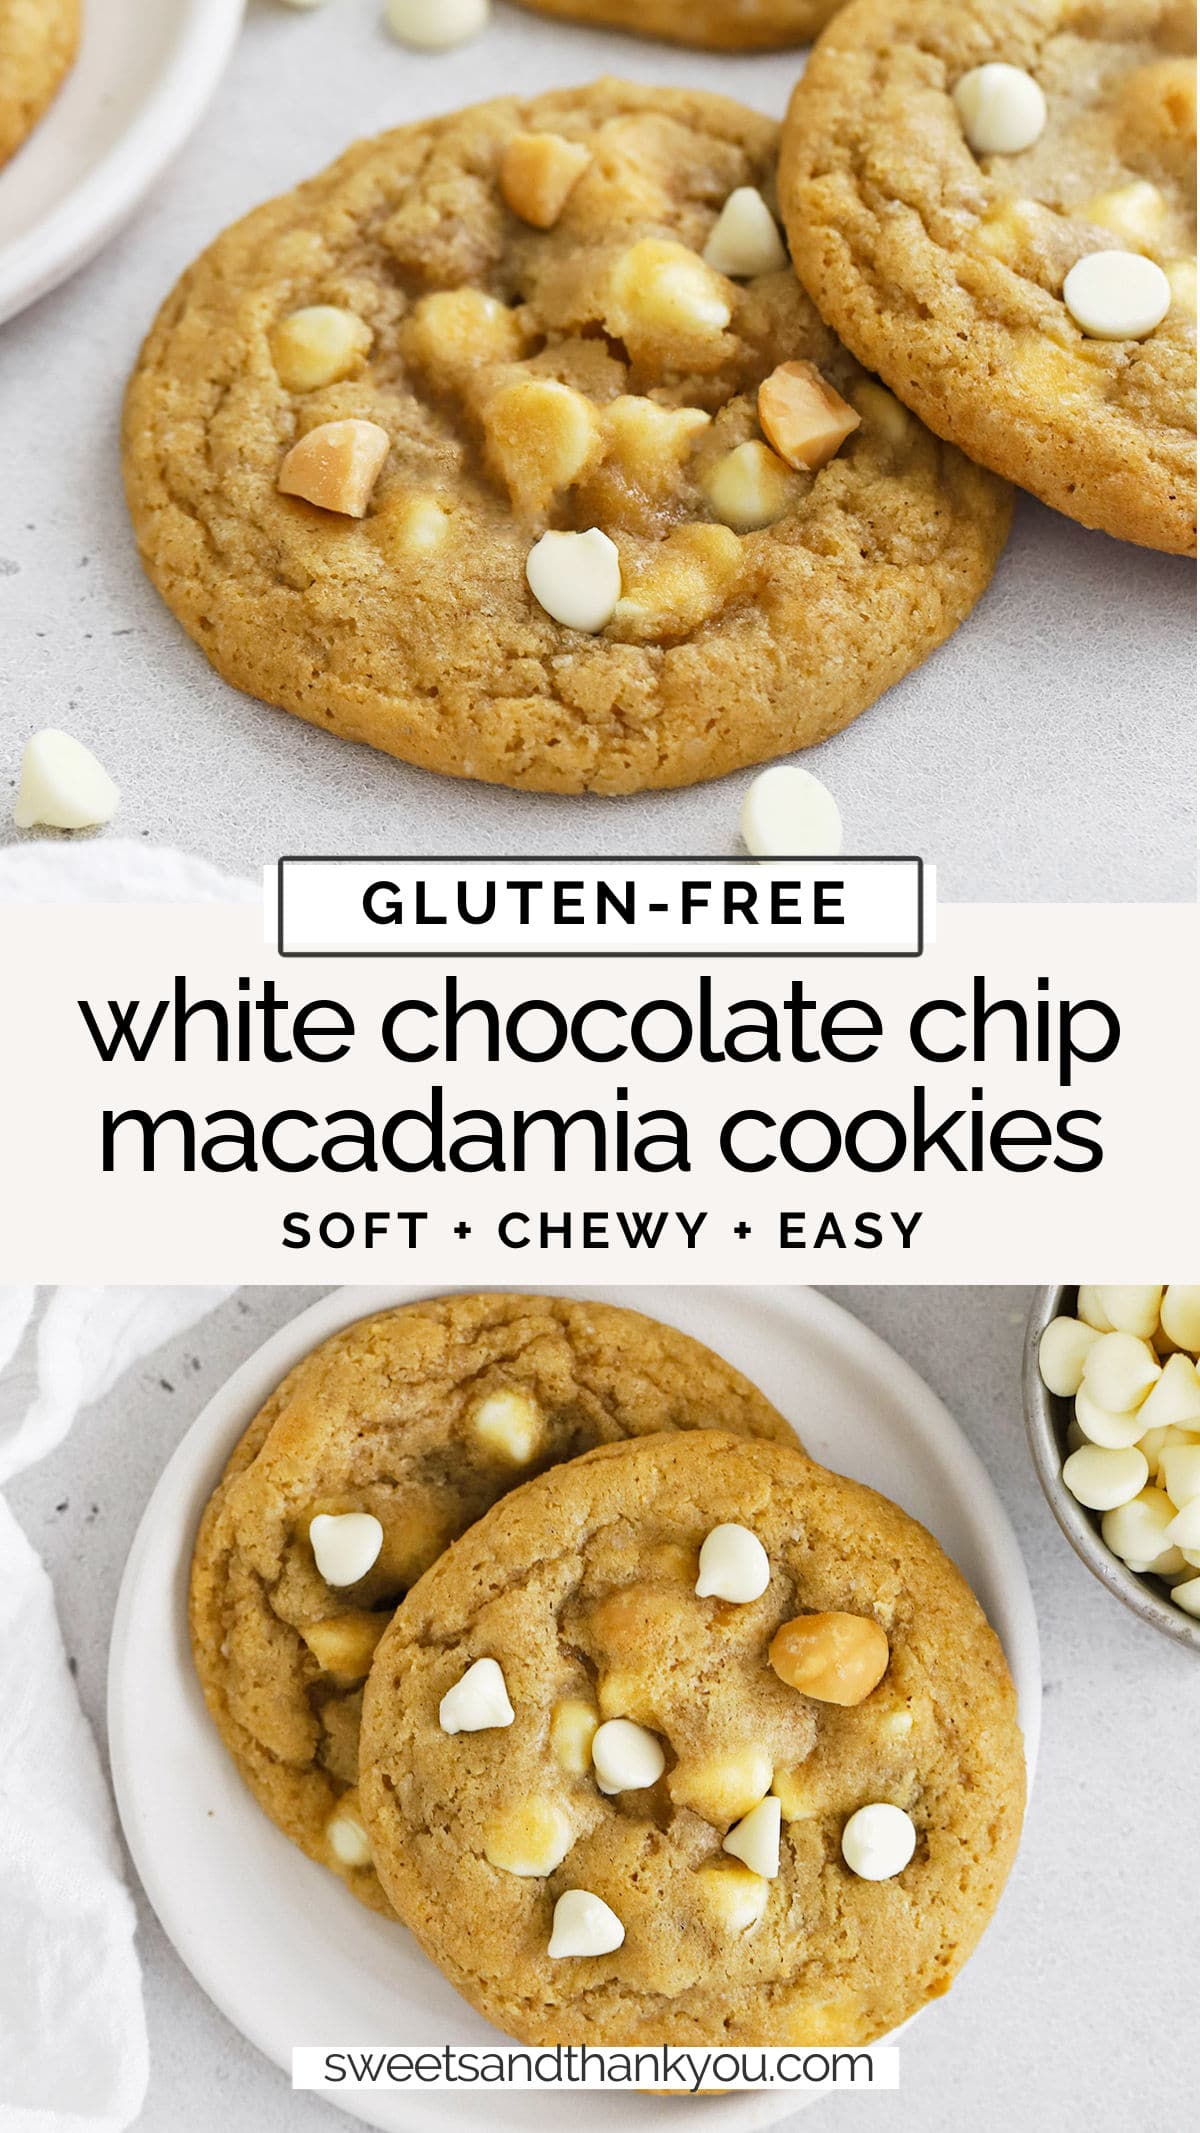 Gluten-Free White Chocolate Macadamia Nut Cookies - These soft, chewy gluten-free macadamia cookies are loaded with white chocolate & nuts. You'll love their yummy flavor! // gluten-free macadamia nut cookies // gluten-free white chocolate chip macadamia nut cookies / gluten-free white chocolate chip macadamia cookies // gluten-free white chocolate macadamia cookie recipe // gluten-free christmas cookies / easy gluten-free cookie recipe / gluten free white chocolate cookie recipe /